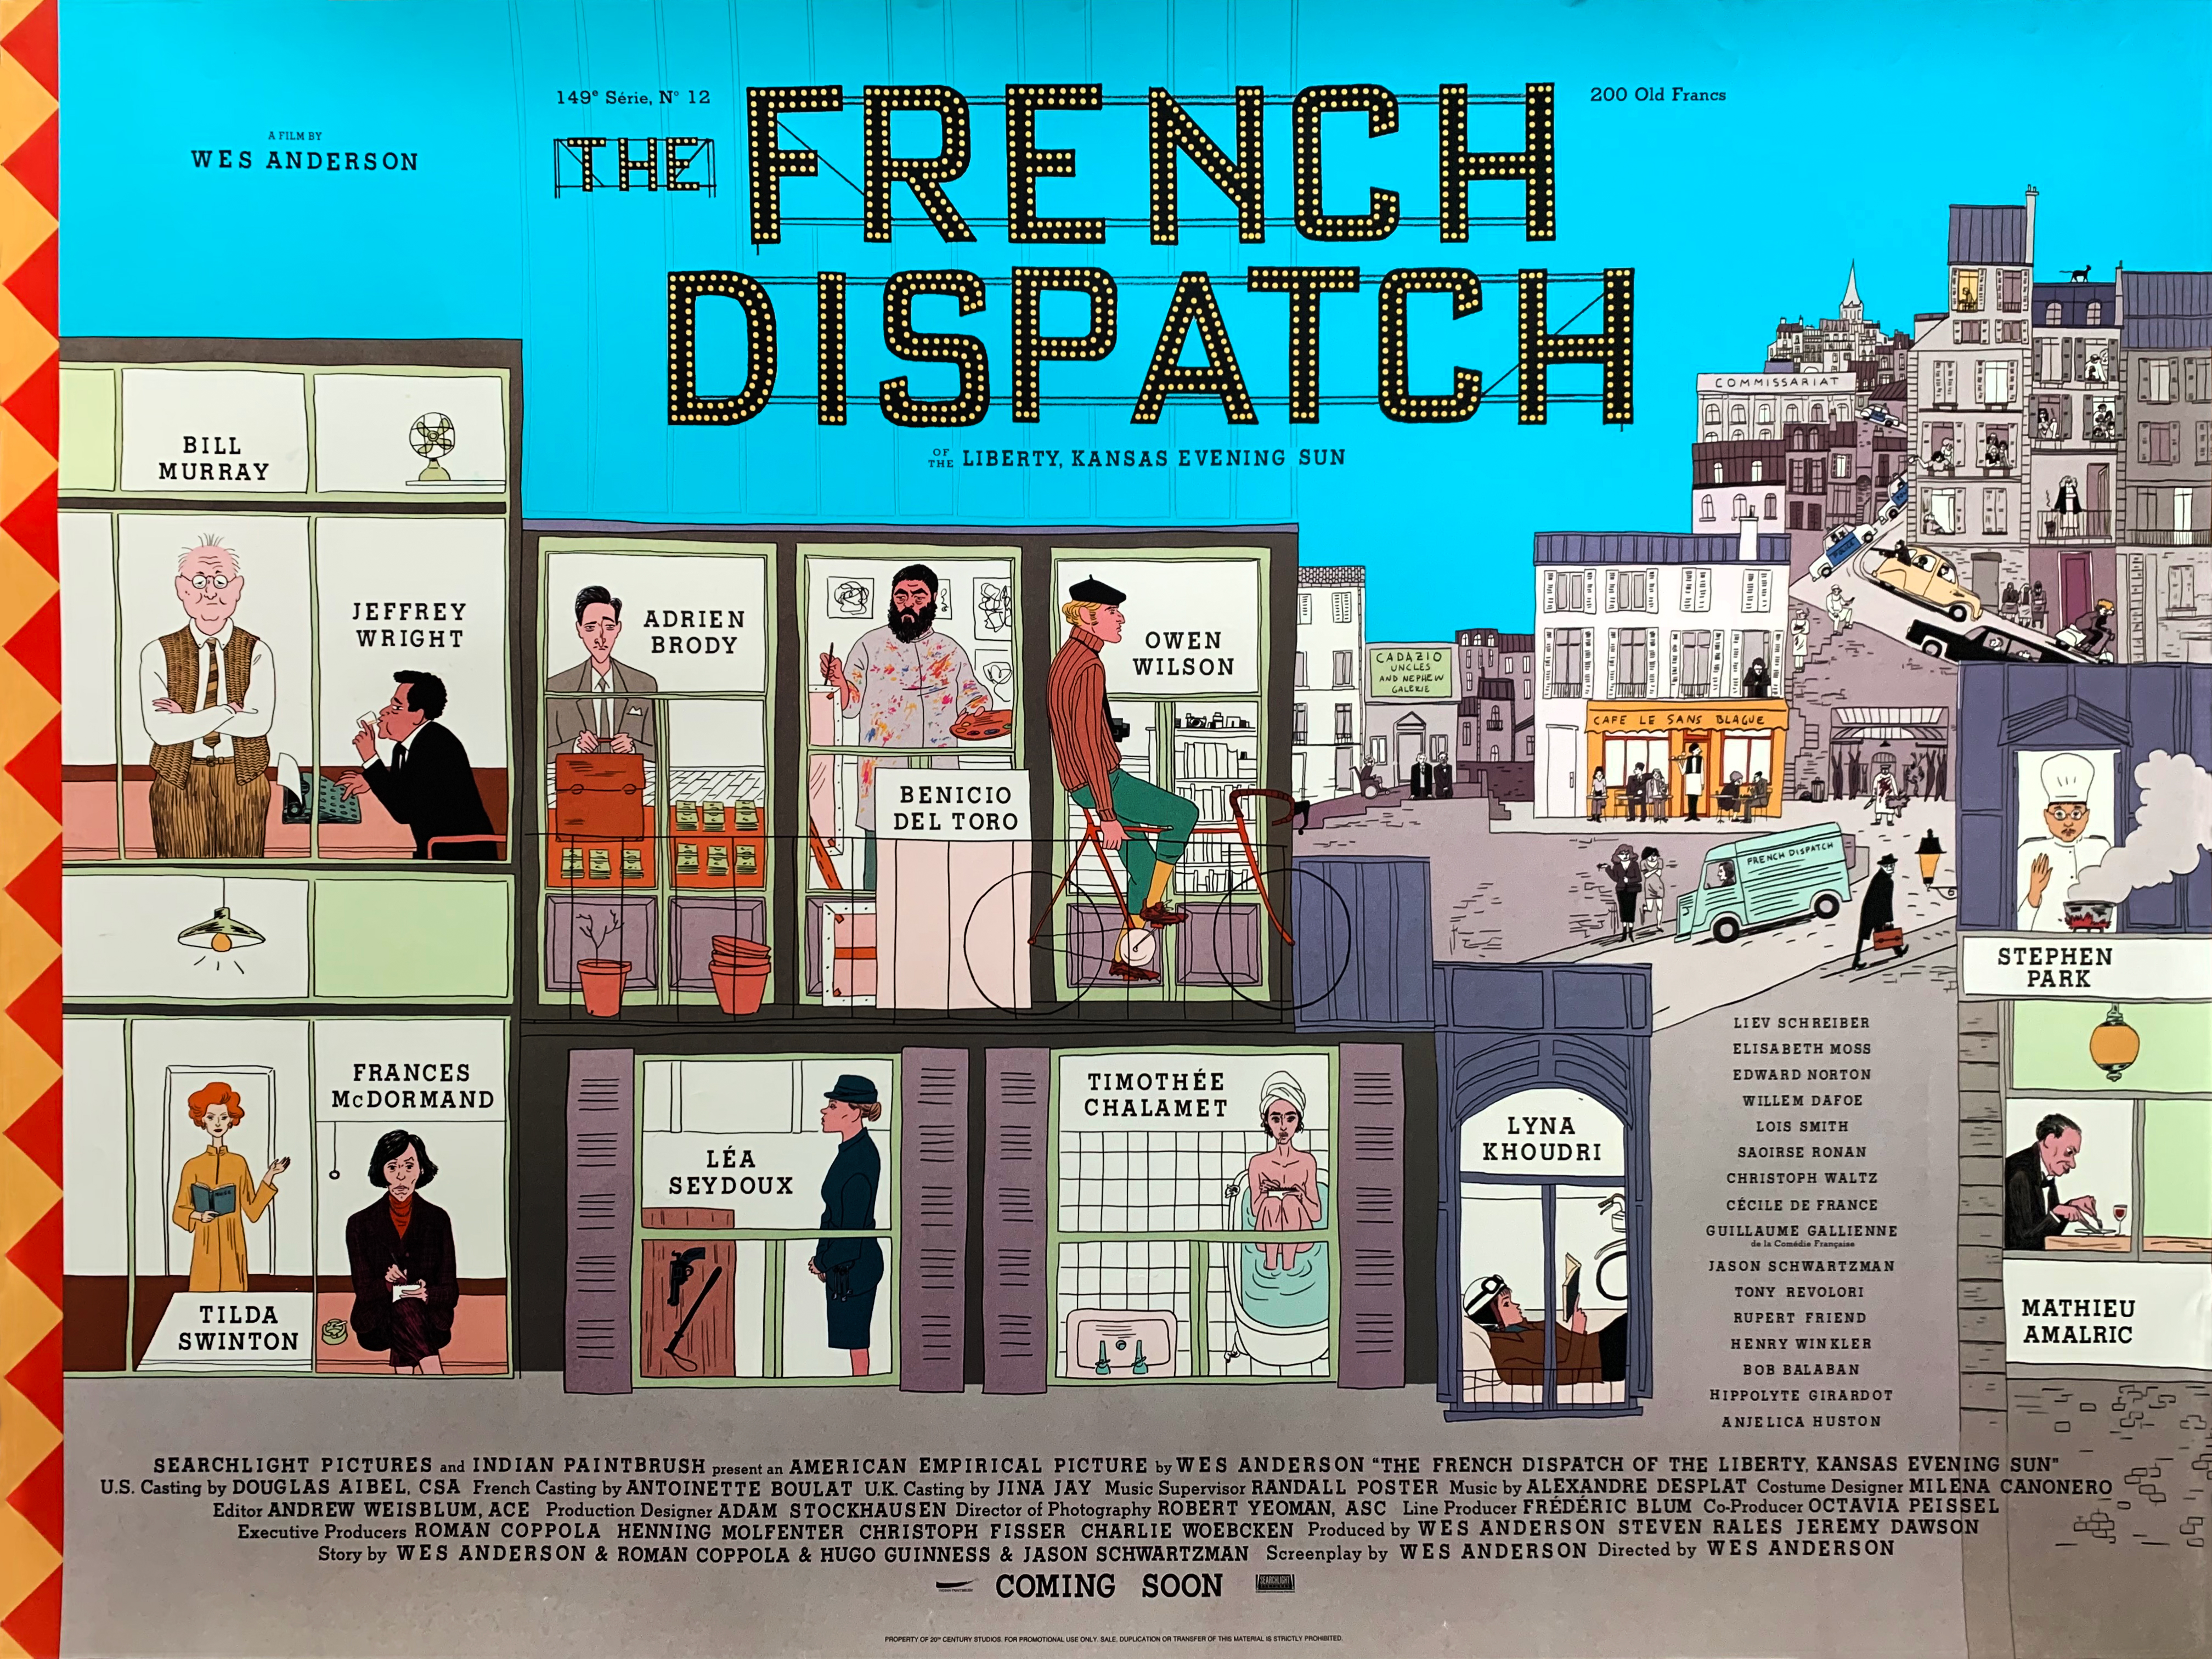 French Despatch movie quad poster